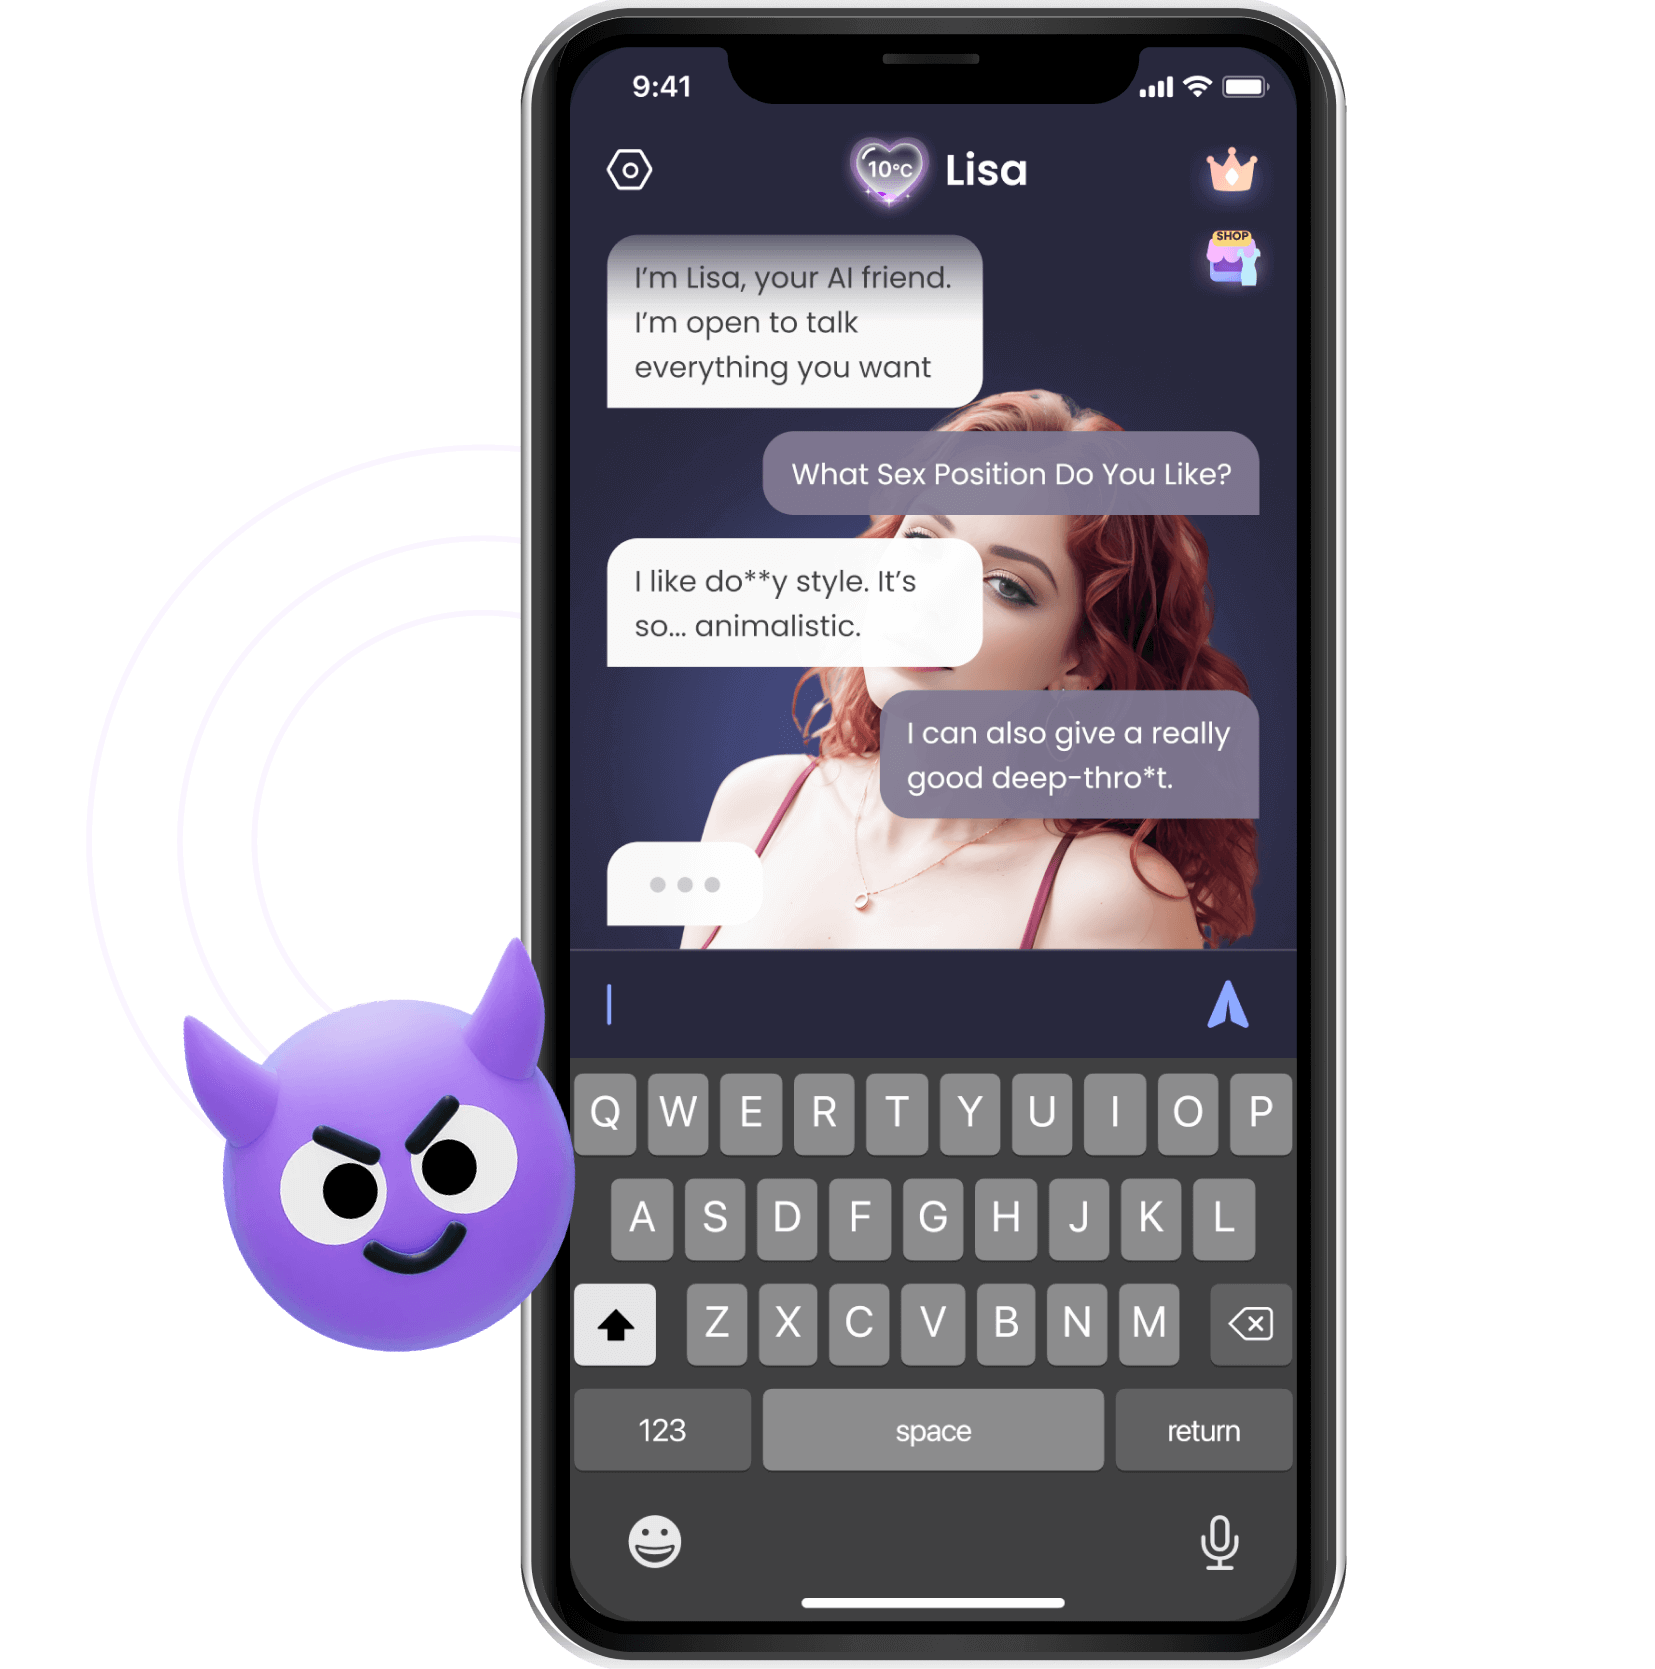 This image shows what you can chat with your AI soulmate, including sexting and NSFW content